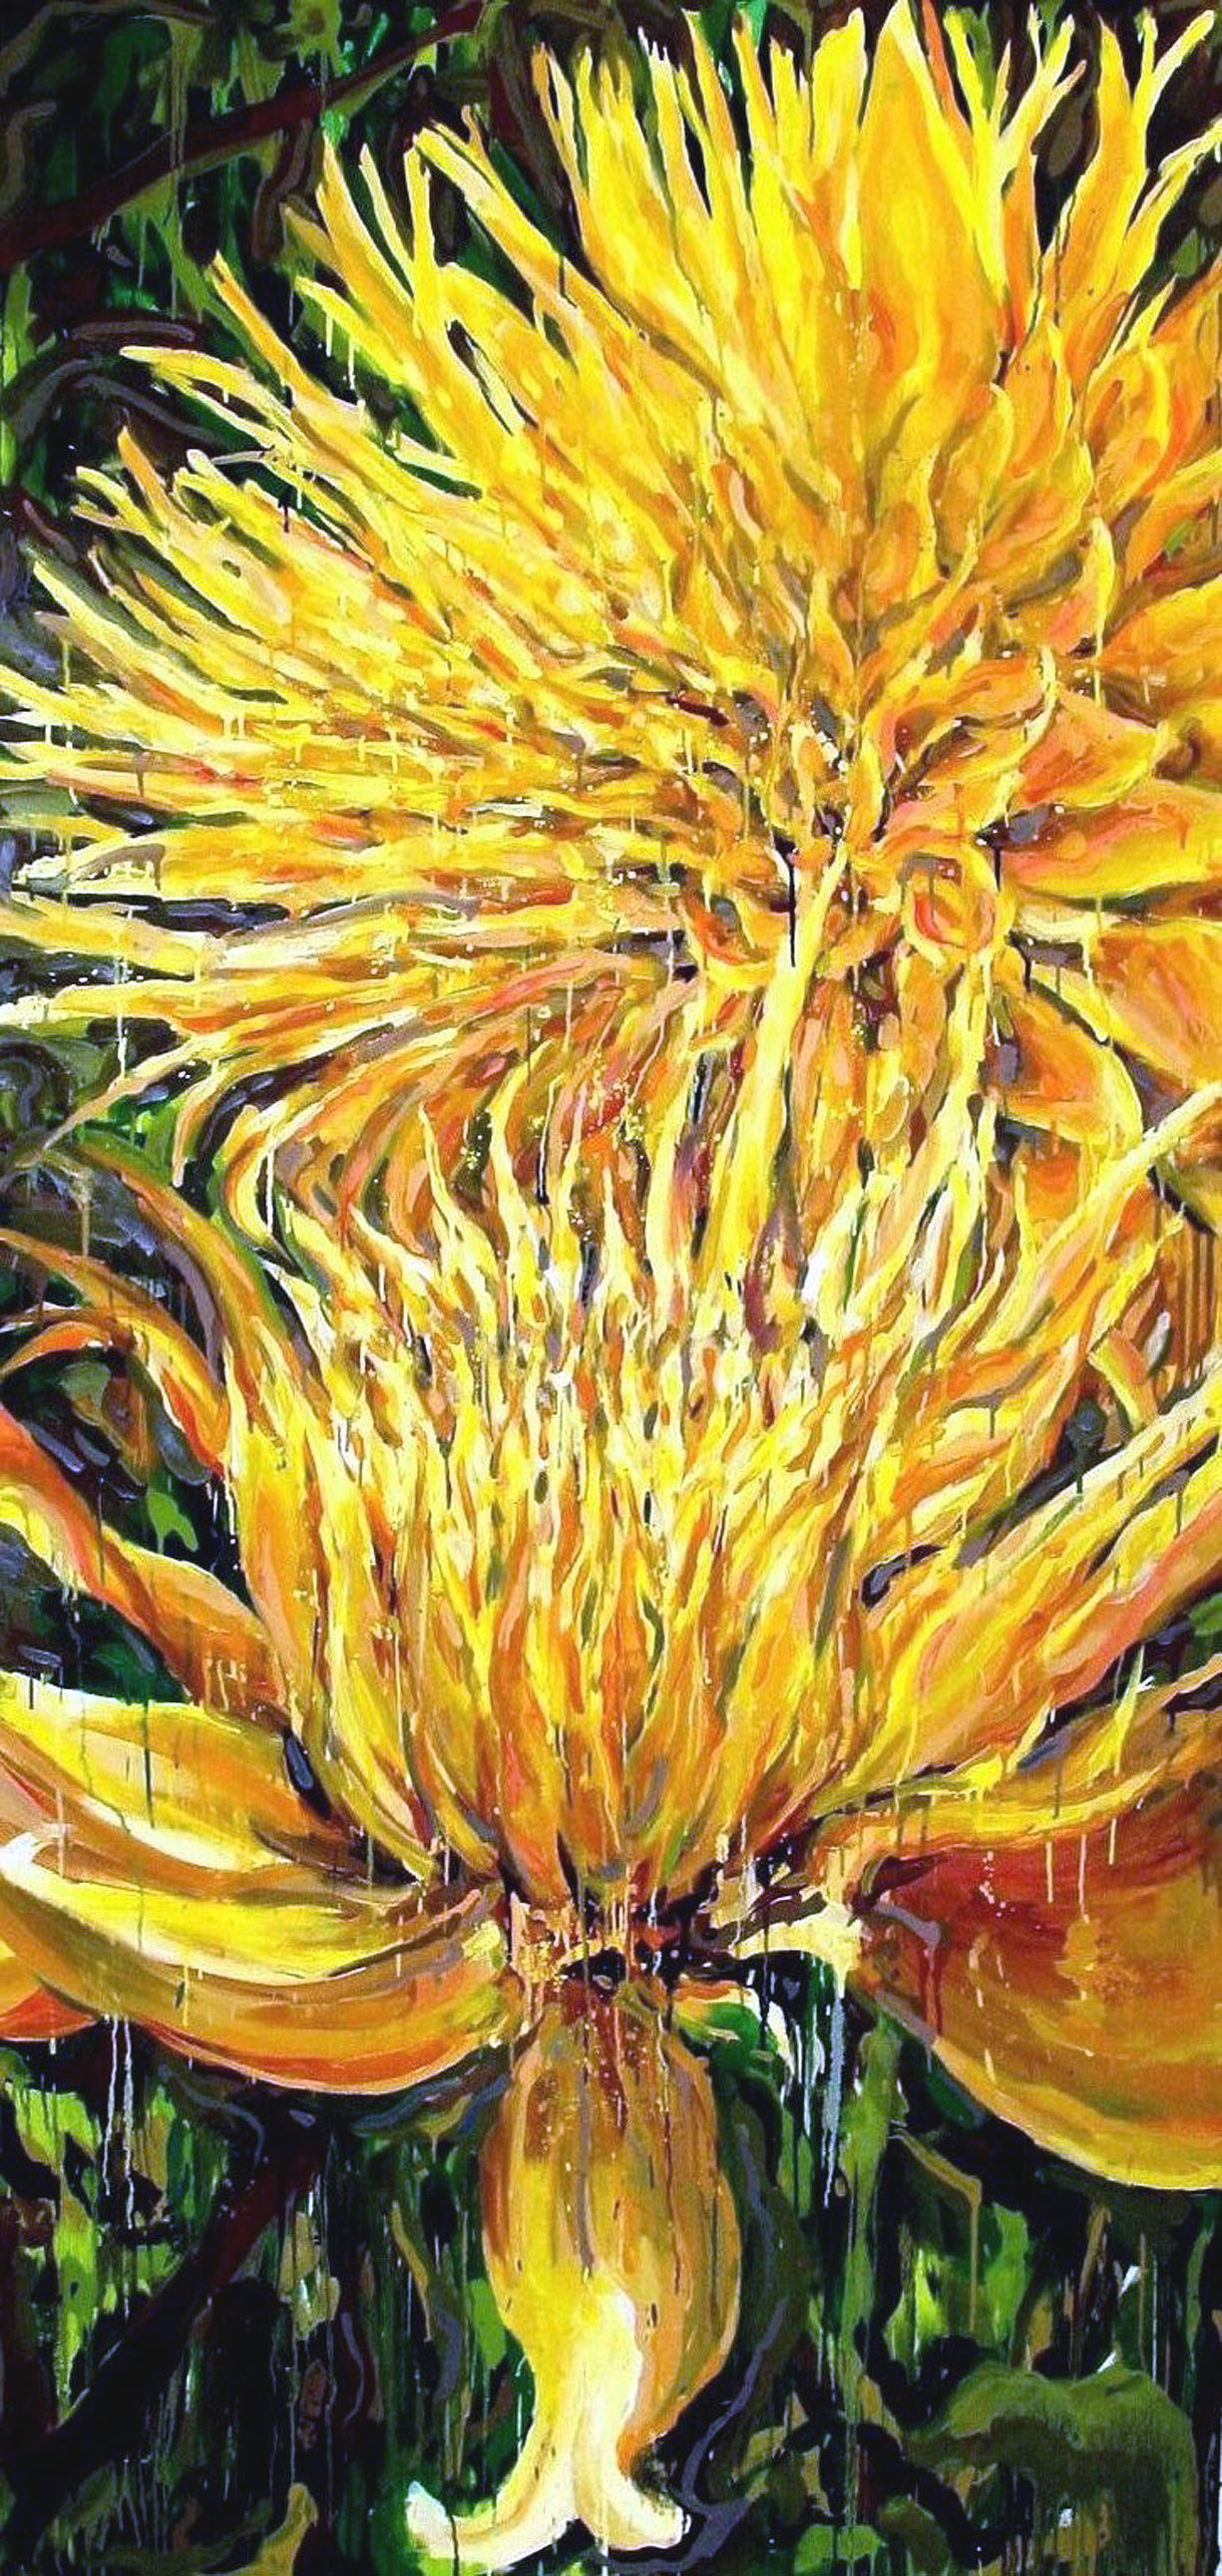 Giant Yellow Flowers, oil on canvas, 50x108in, Jessica Siemens 2009